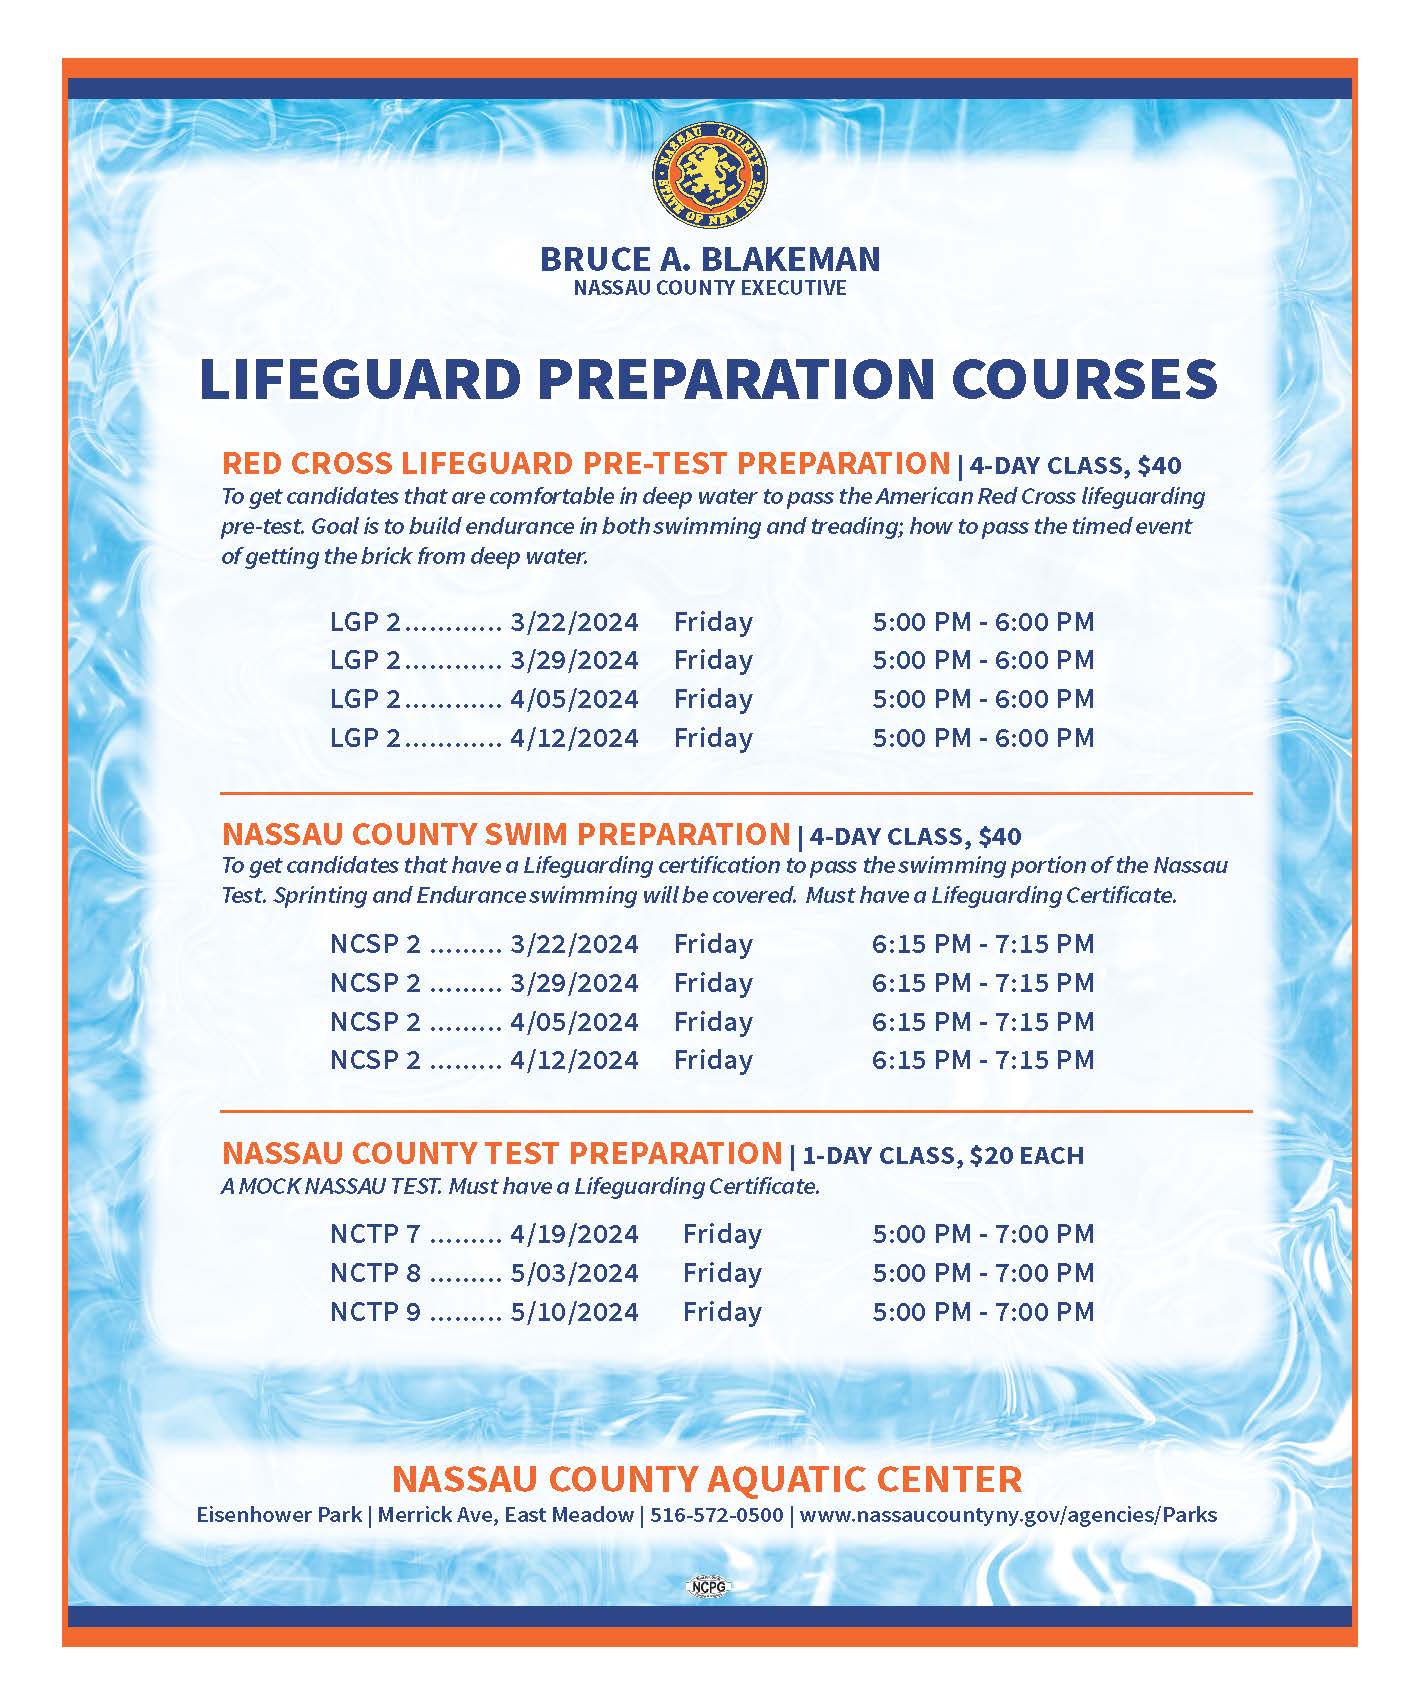 Lifeguarding Preparation Courses Opens in new window